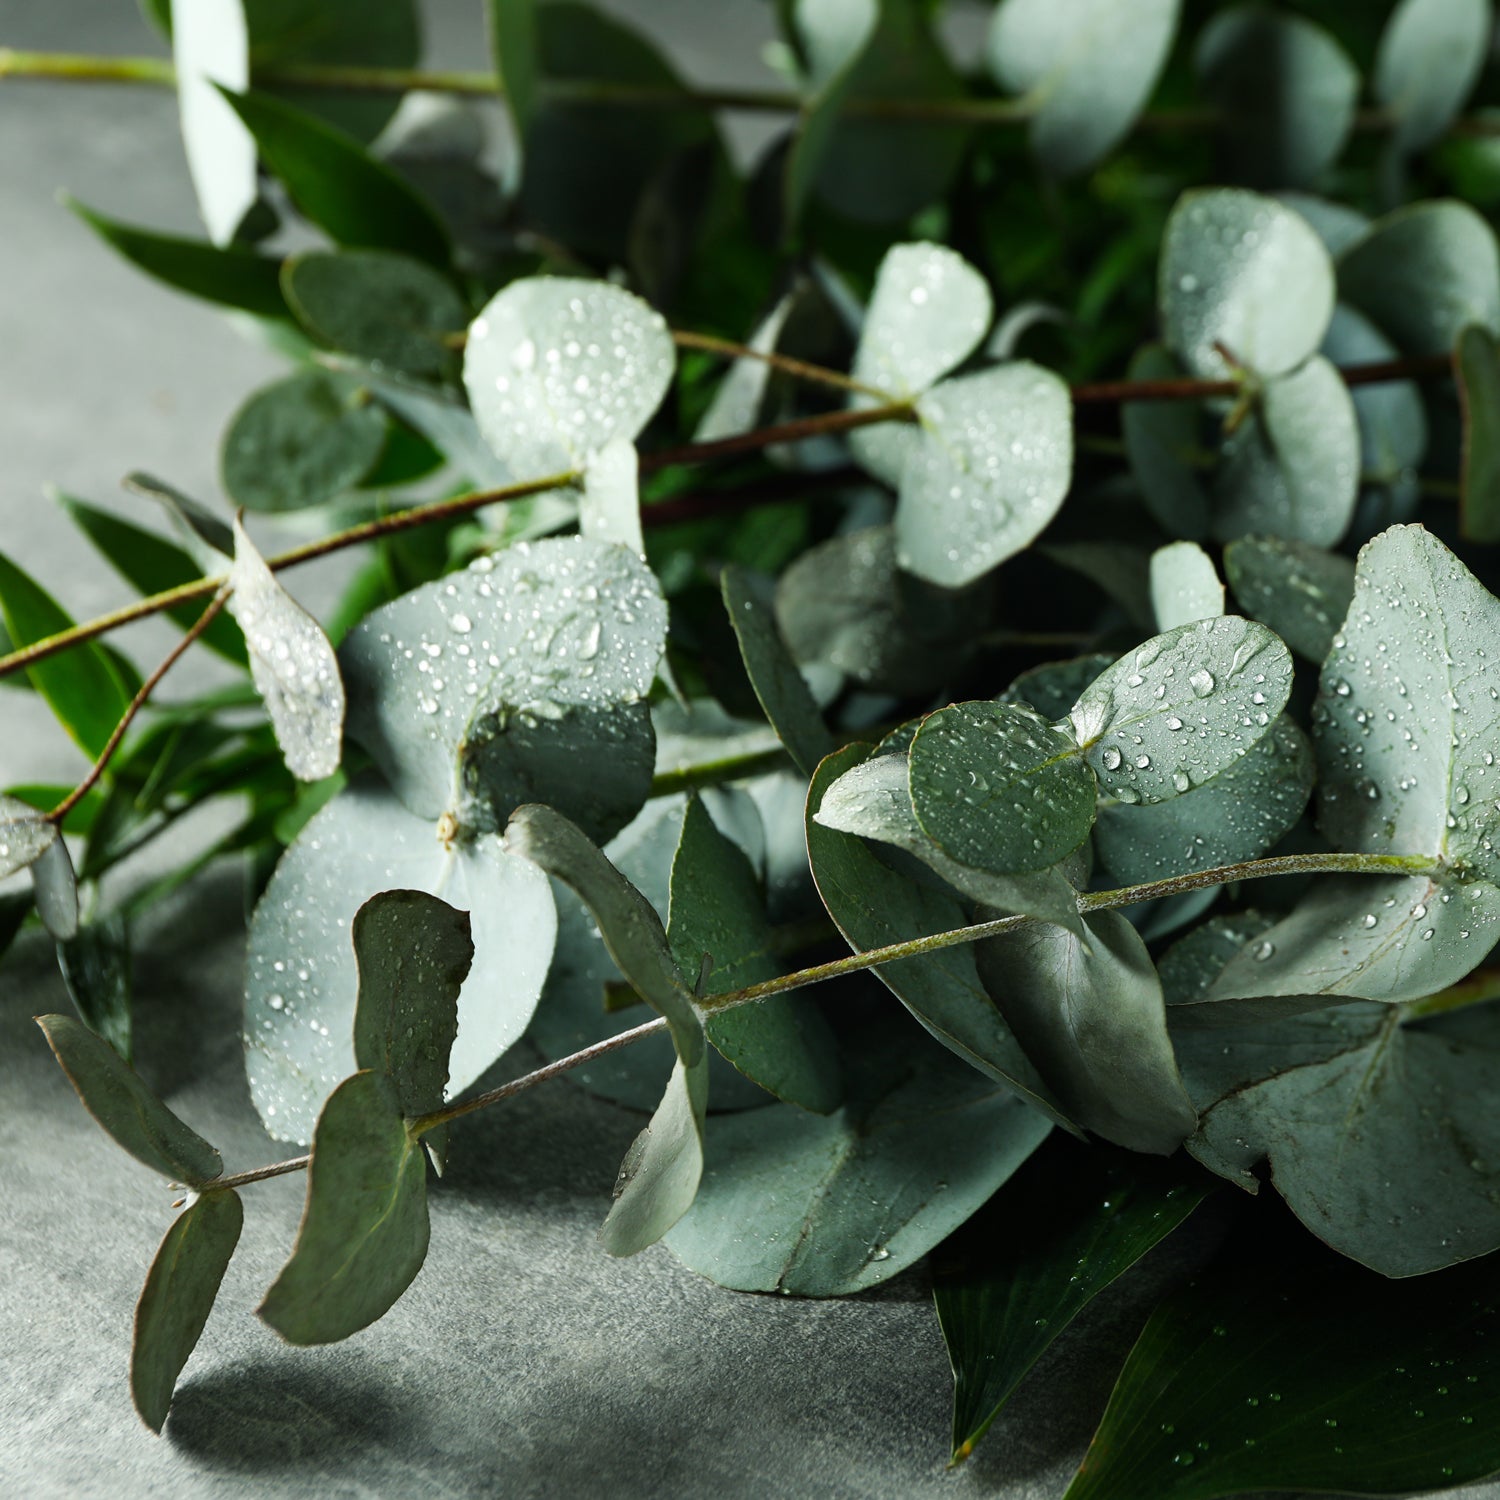 A photo of moist Eucalyptus leaves - one of the primary fragrance notes in Tuscany Candle's "Glacial Renewal" scented candle